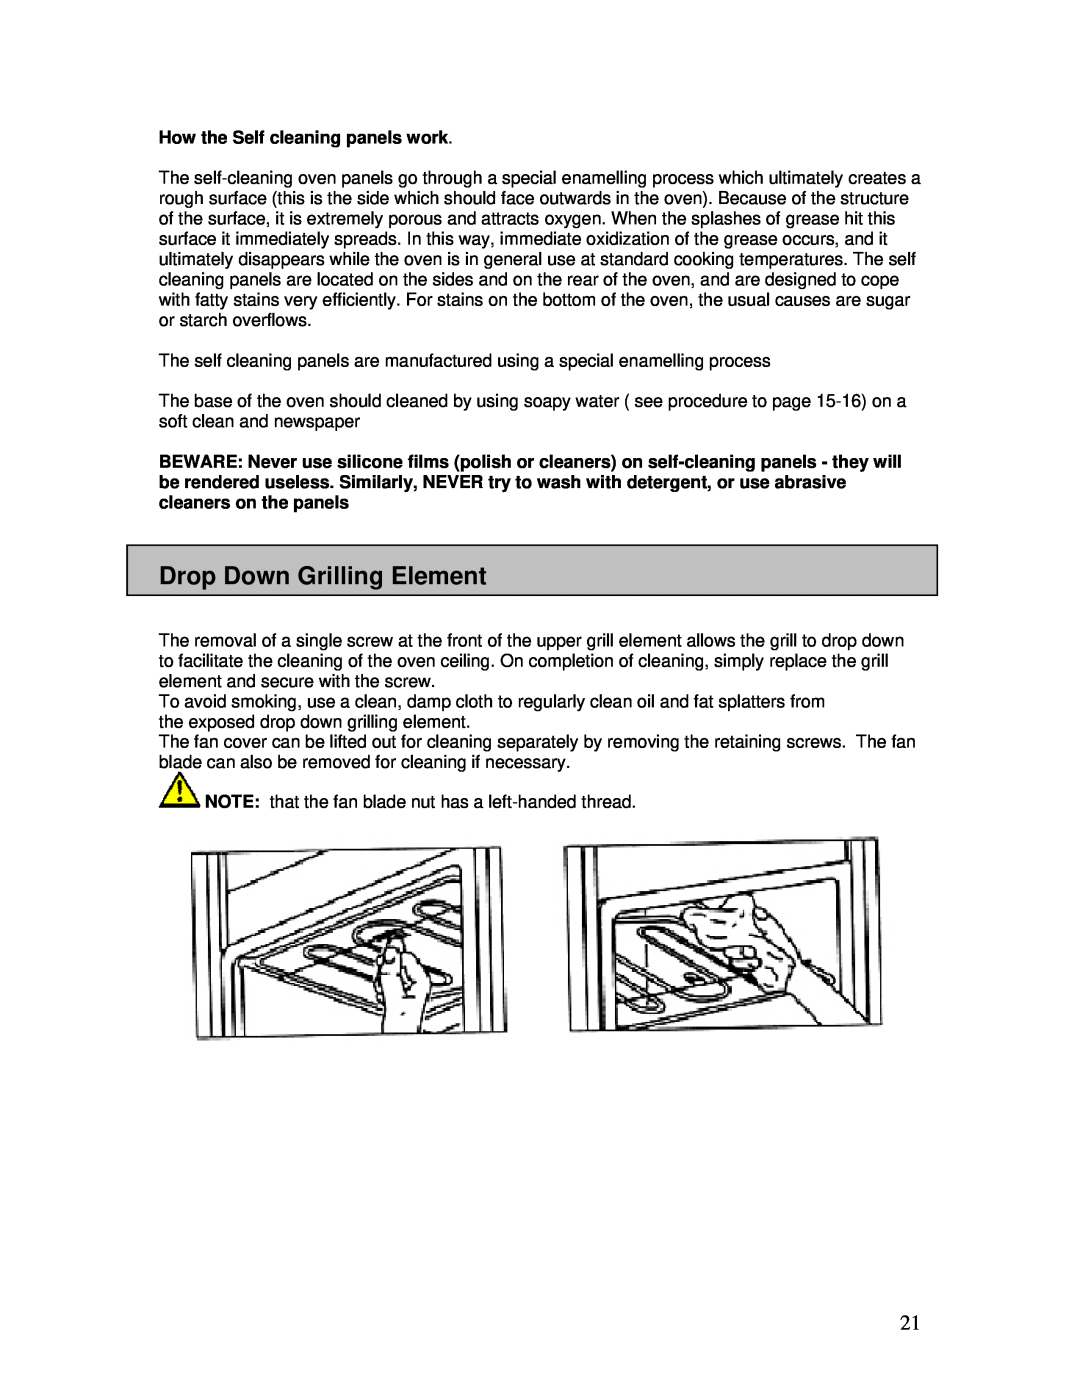 AEG B3007H-L-B user manual Drop Down Grilling Element, How the Self cleaning panels work 